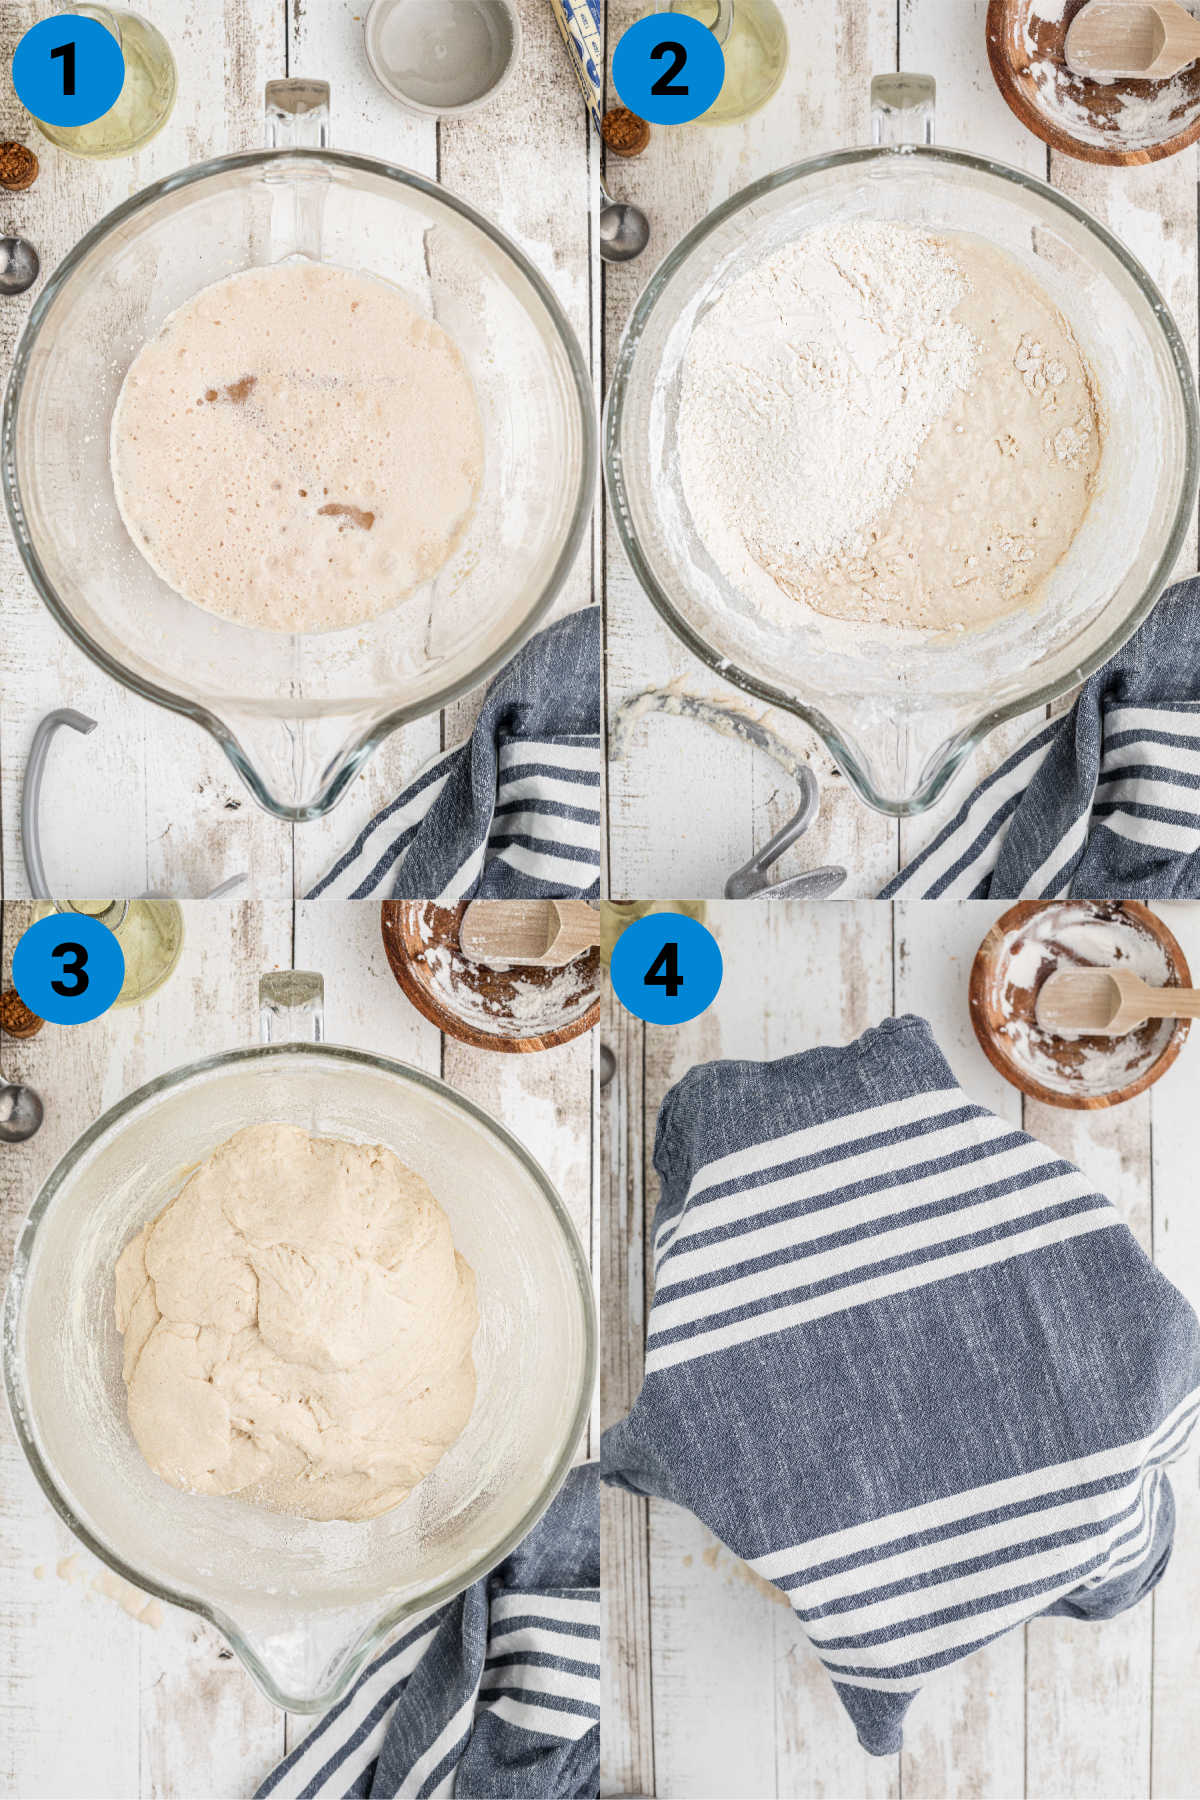 A collage of four images showing how to make Amish Cinnamon rolls, steps 1-4.